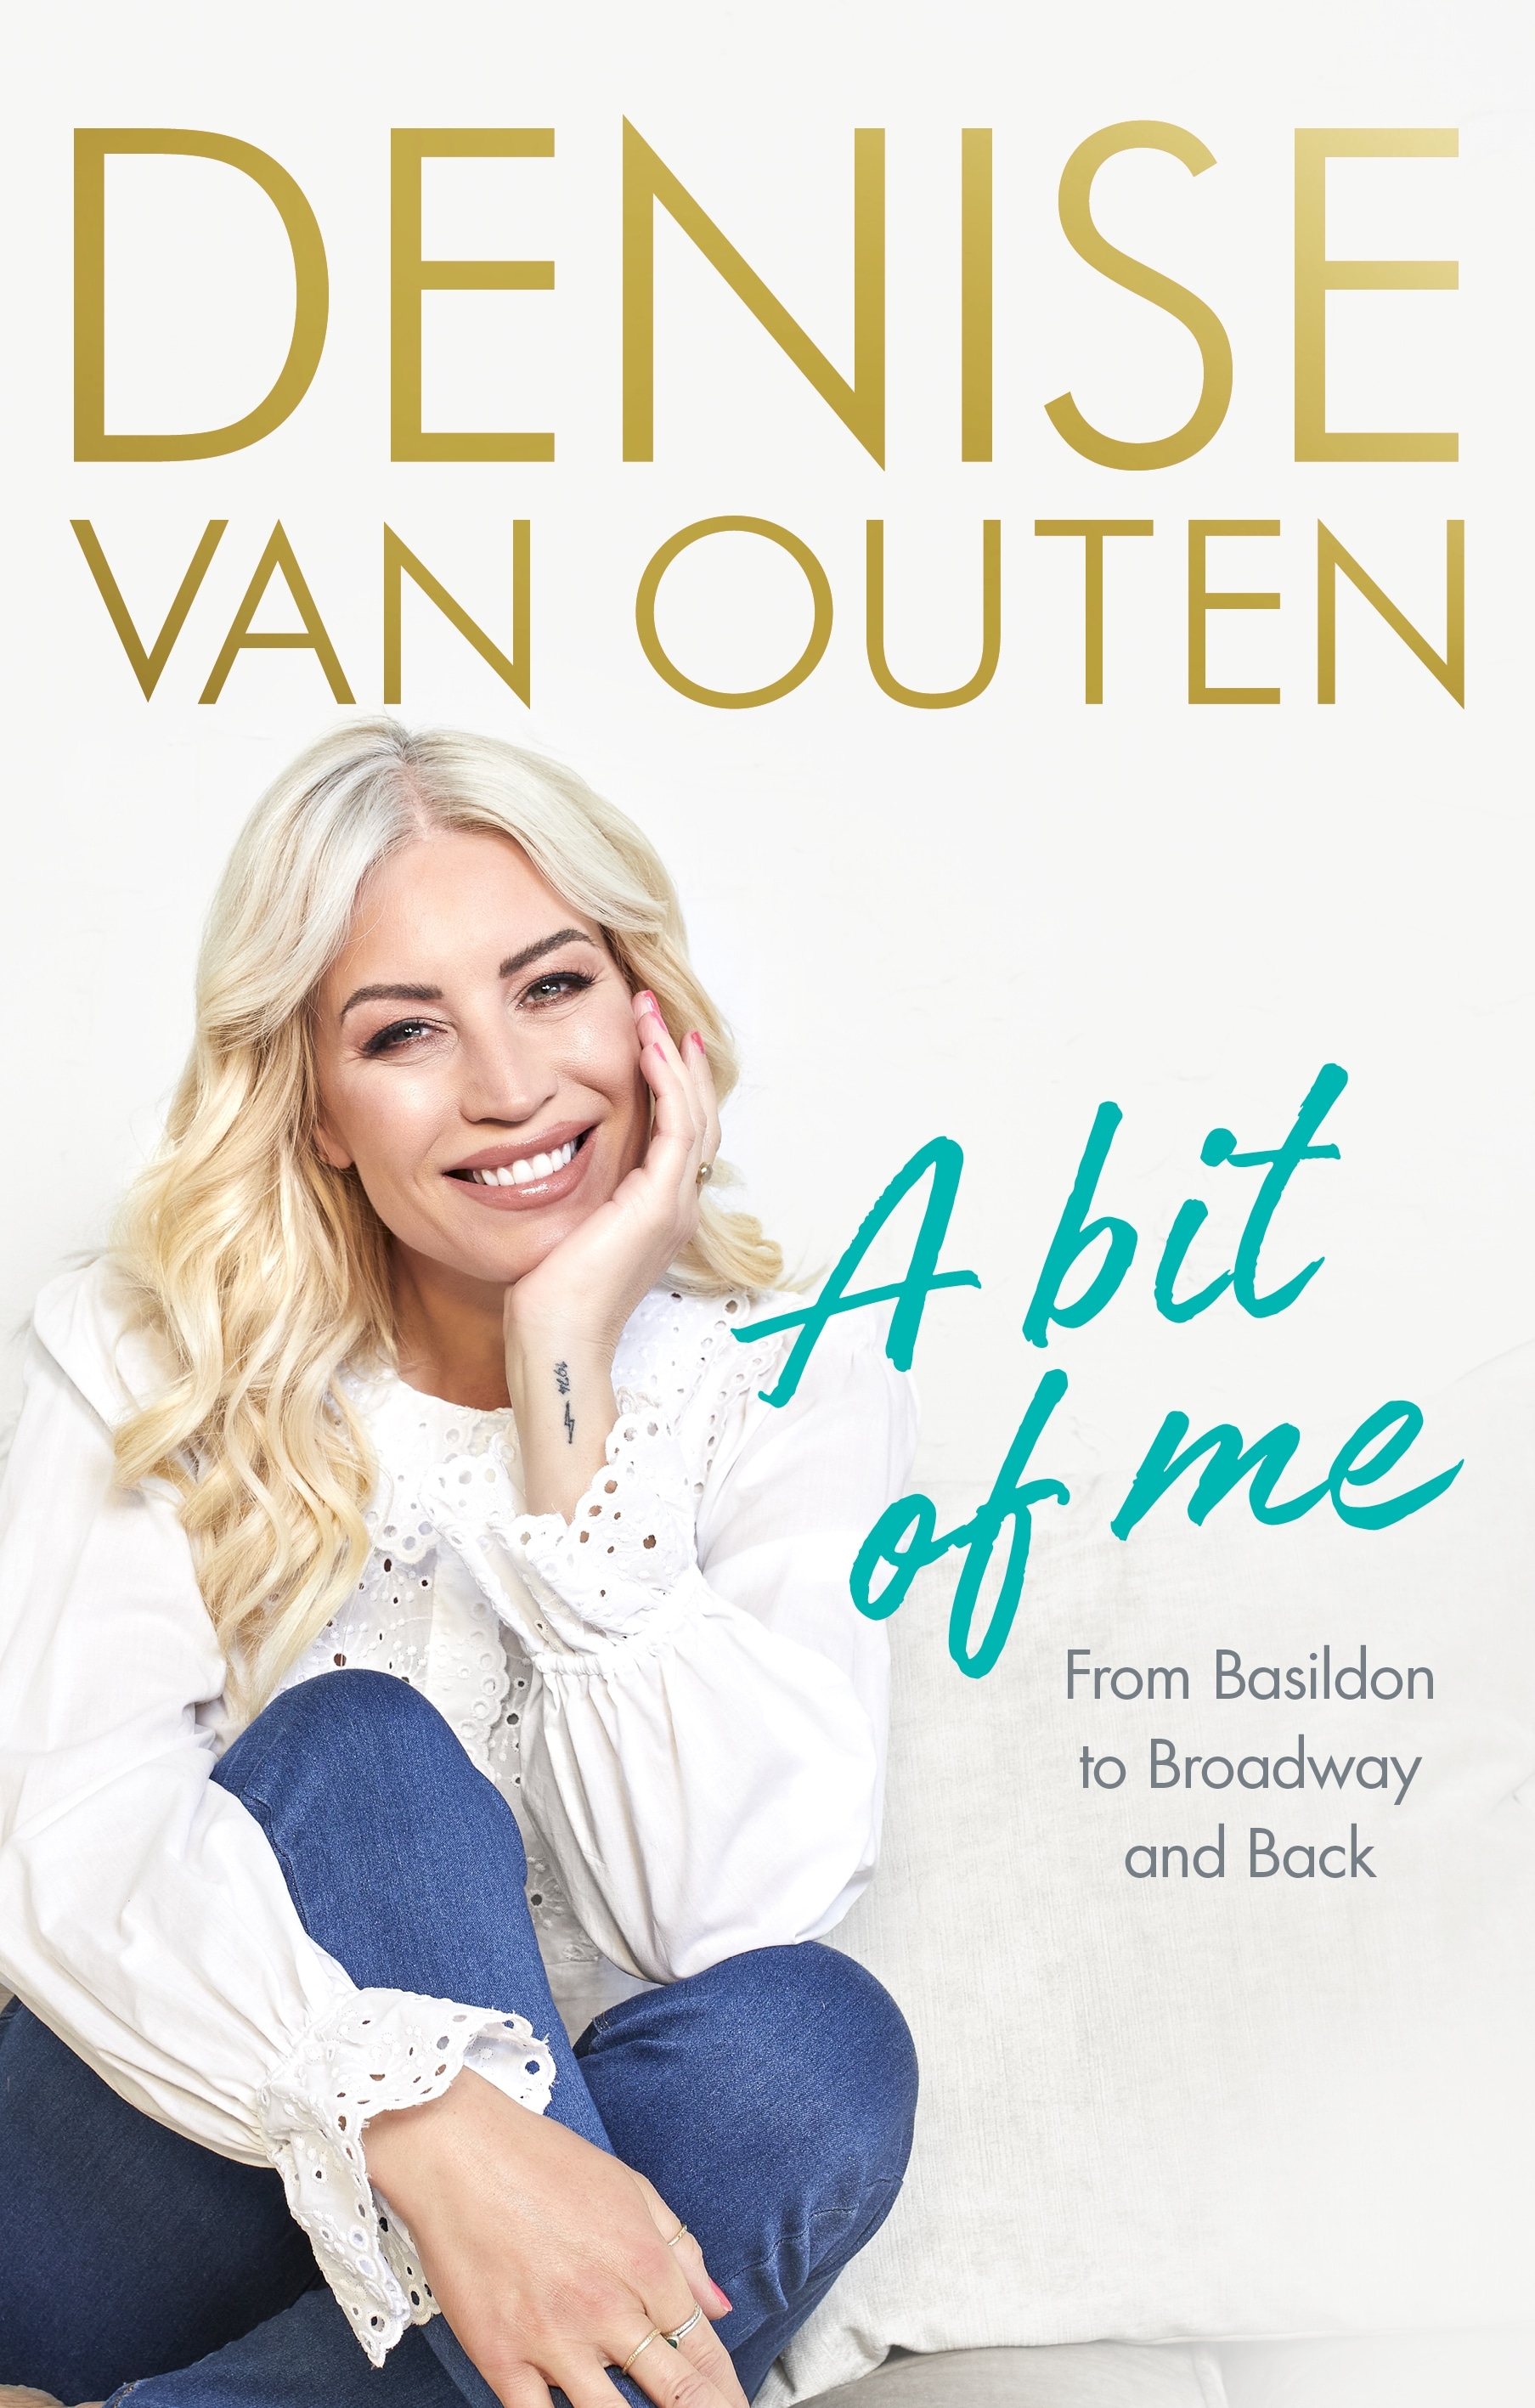 Book “A Bit of Me” by Denise Van Outen — November 11, 2021